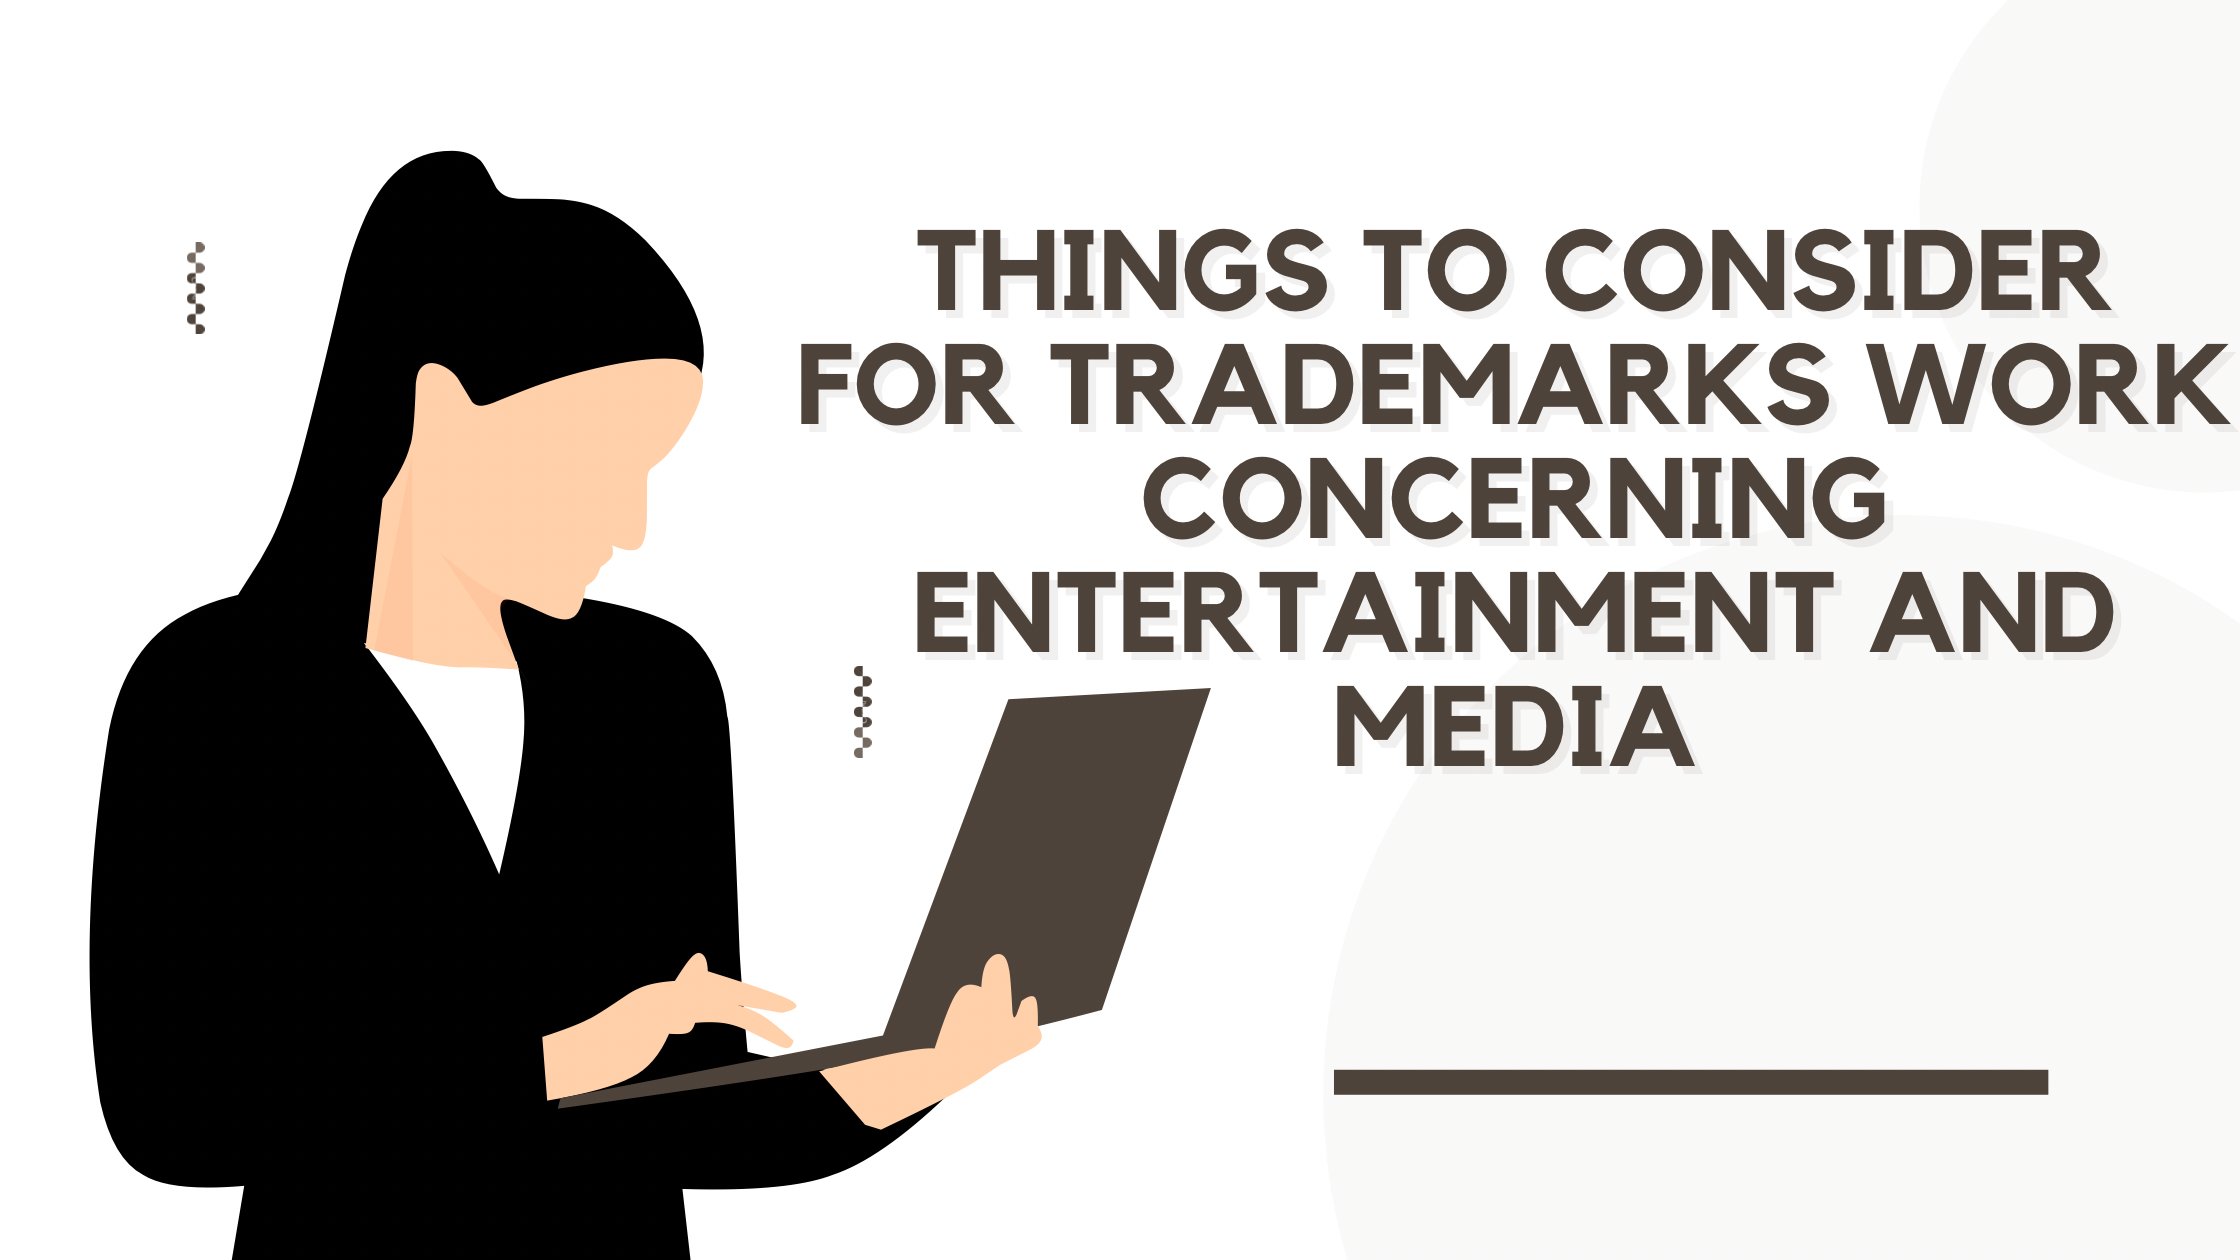 THINGS TO CONSIDER FOR TRADEMARKS WORK CONCERNING ENTERTAINMENT AND MEDIA